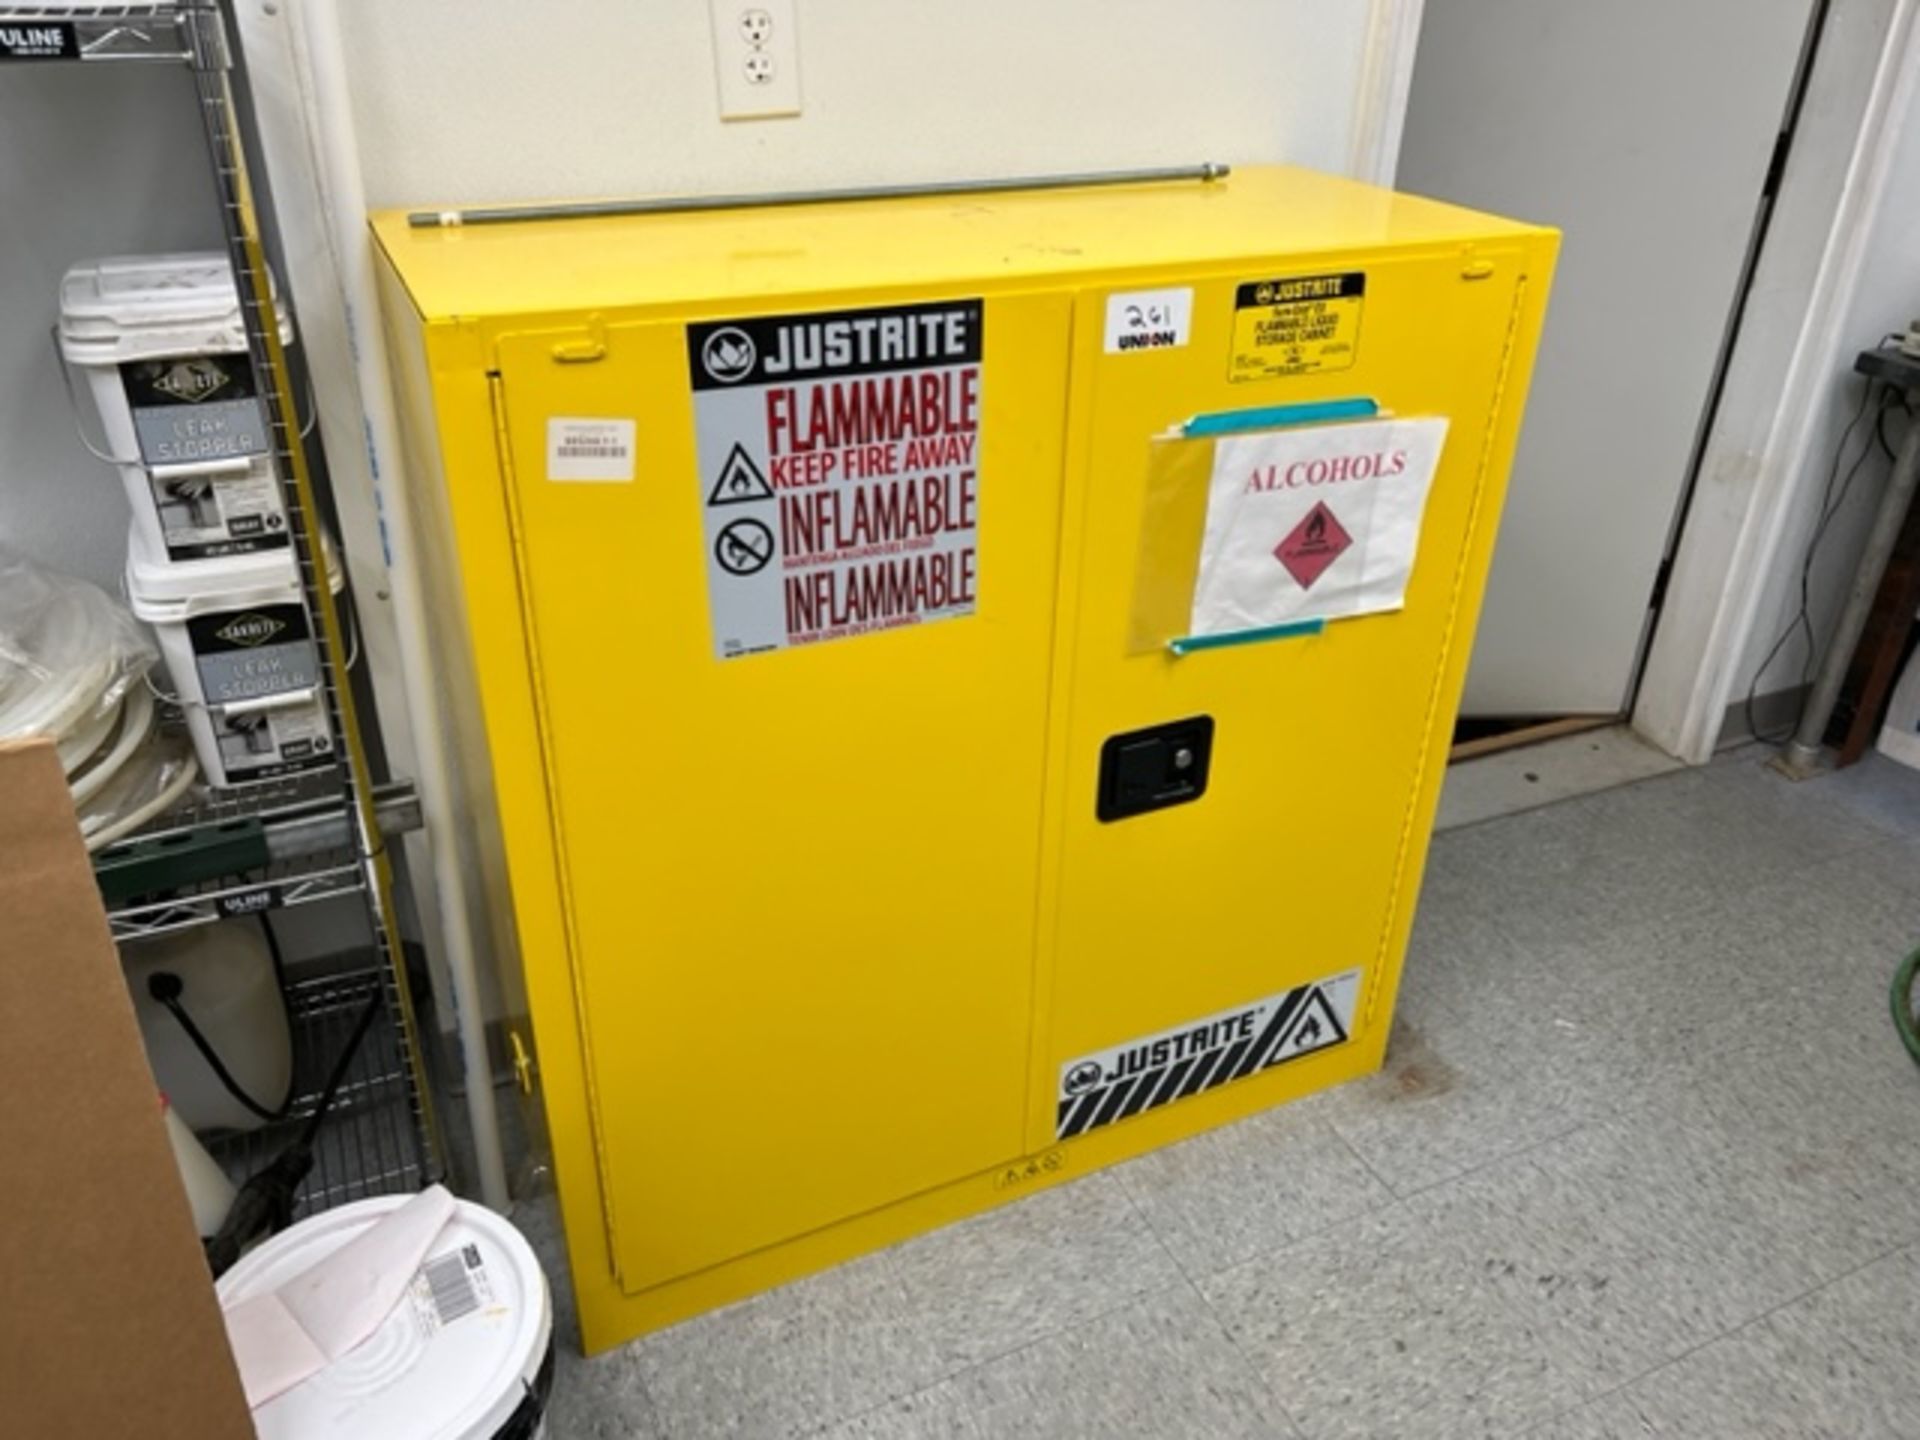 Asset 261- Justrite flammable liquid storage cabinet, 39" wide x 17" deep x 43" tall. $345.00 Rigged - Image 2 of 4